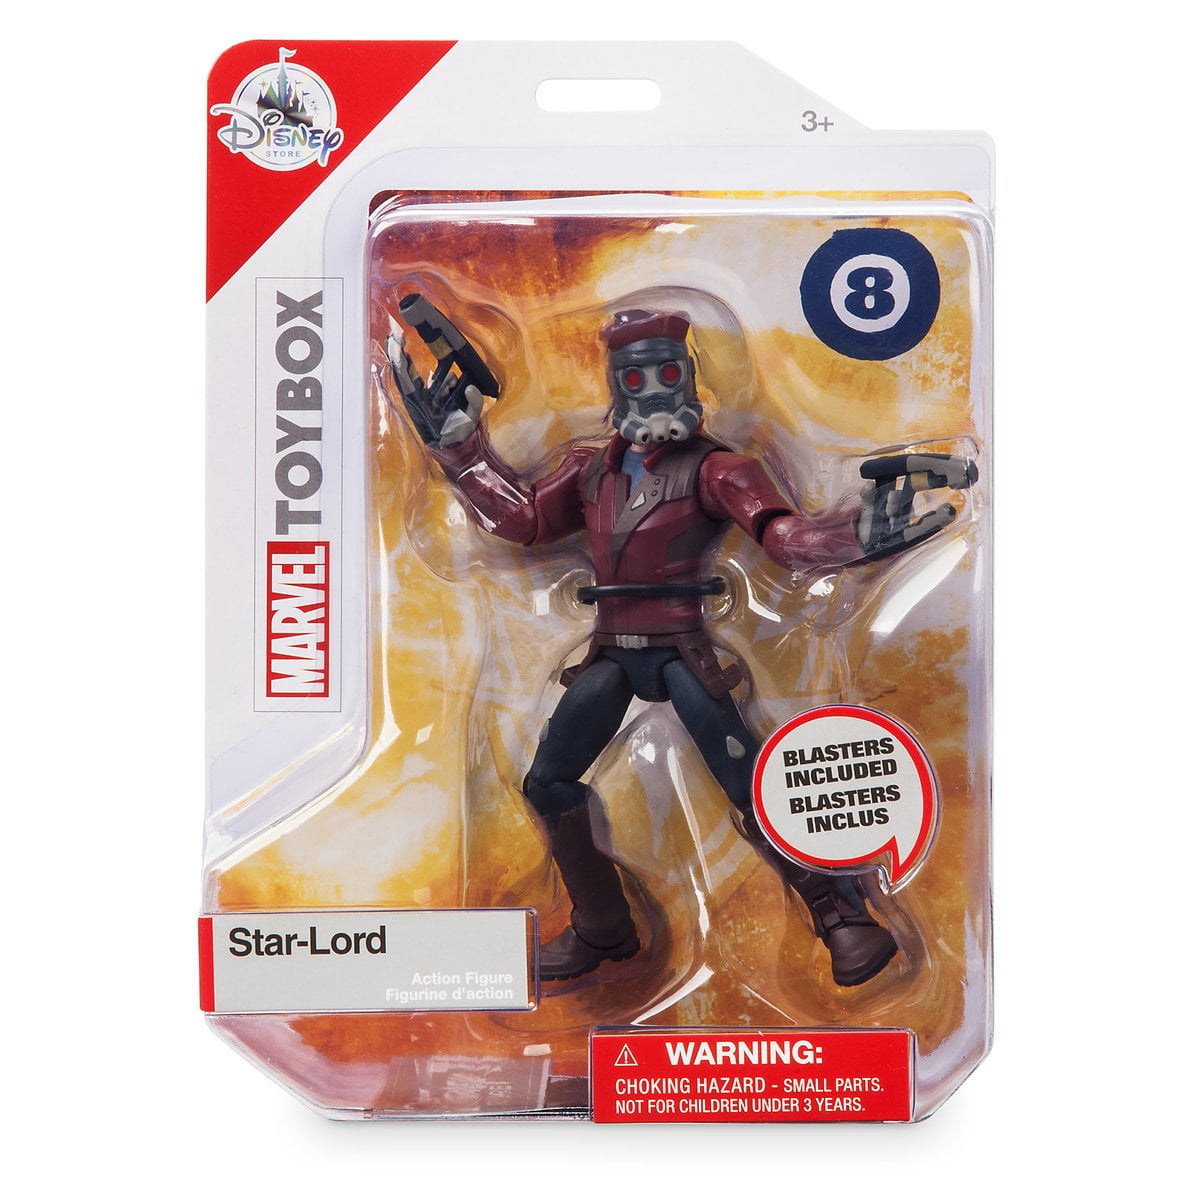 Disney Store Marvel Star-Lord Action Figure Toybox New with Box